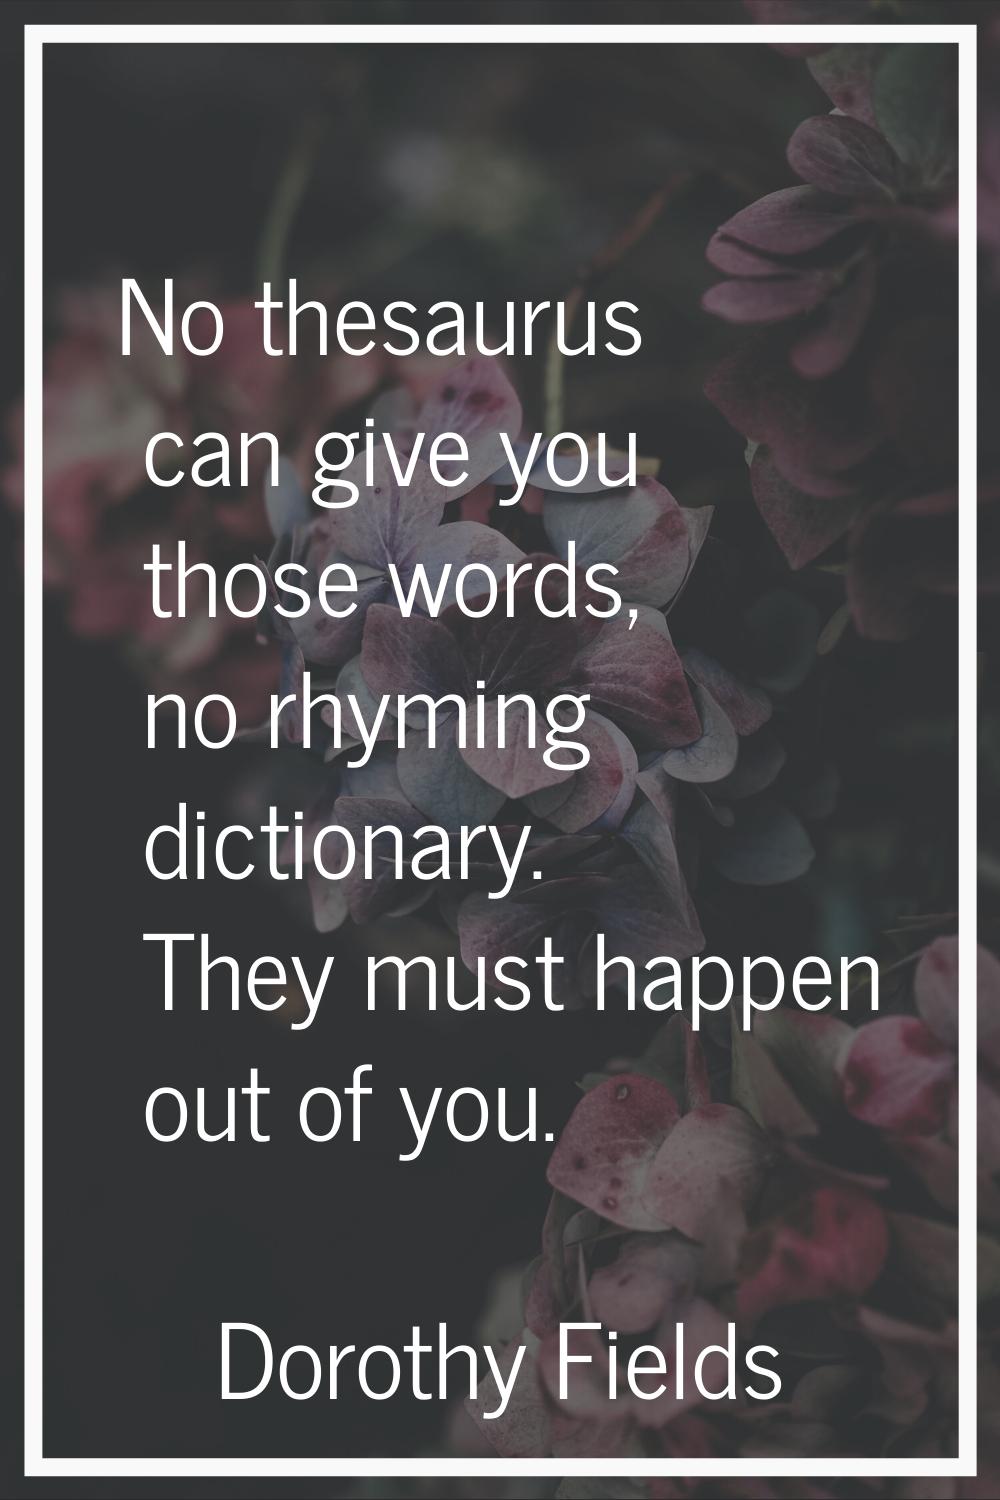 No thesaurus can give you those words, no rhyming dictionary. They must happen out of you.